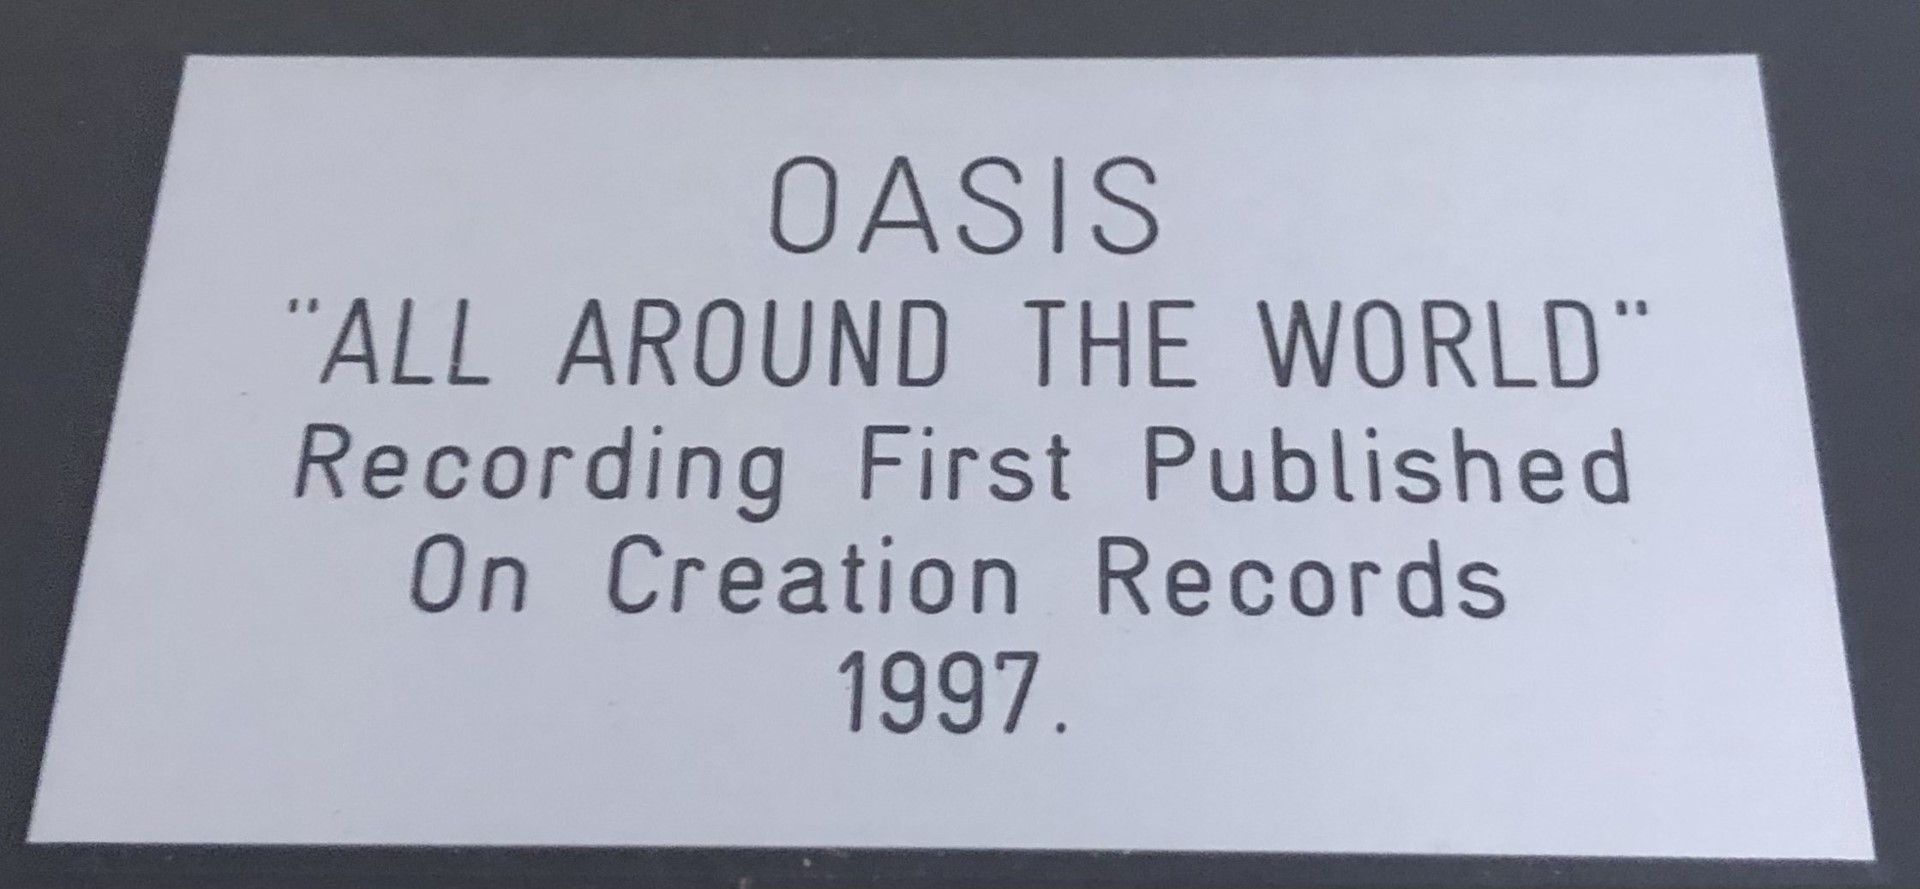 1 x Framed OASIS Silver 7 Inch Vinyl Record - ALL AROUND THE WORLD - Image 2 of 4